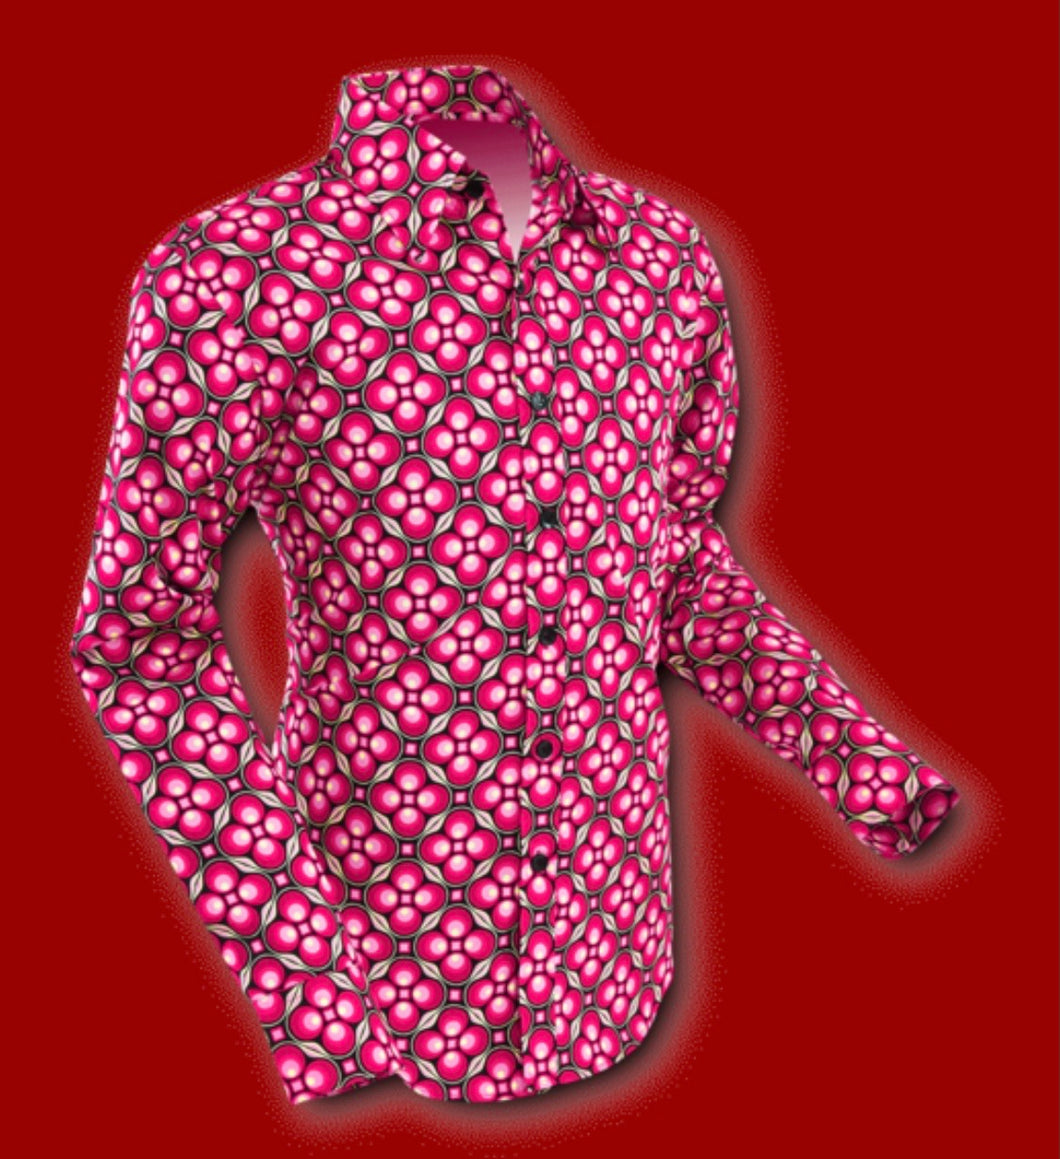 Dotsgrid design long sleeved Retro 70s style shirt in Red & Black